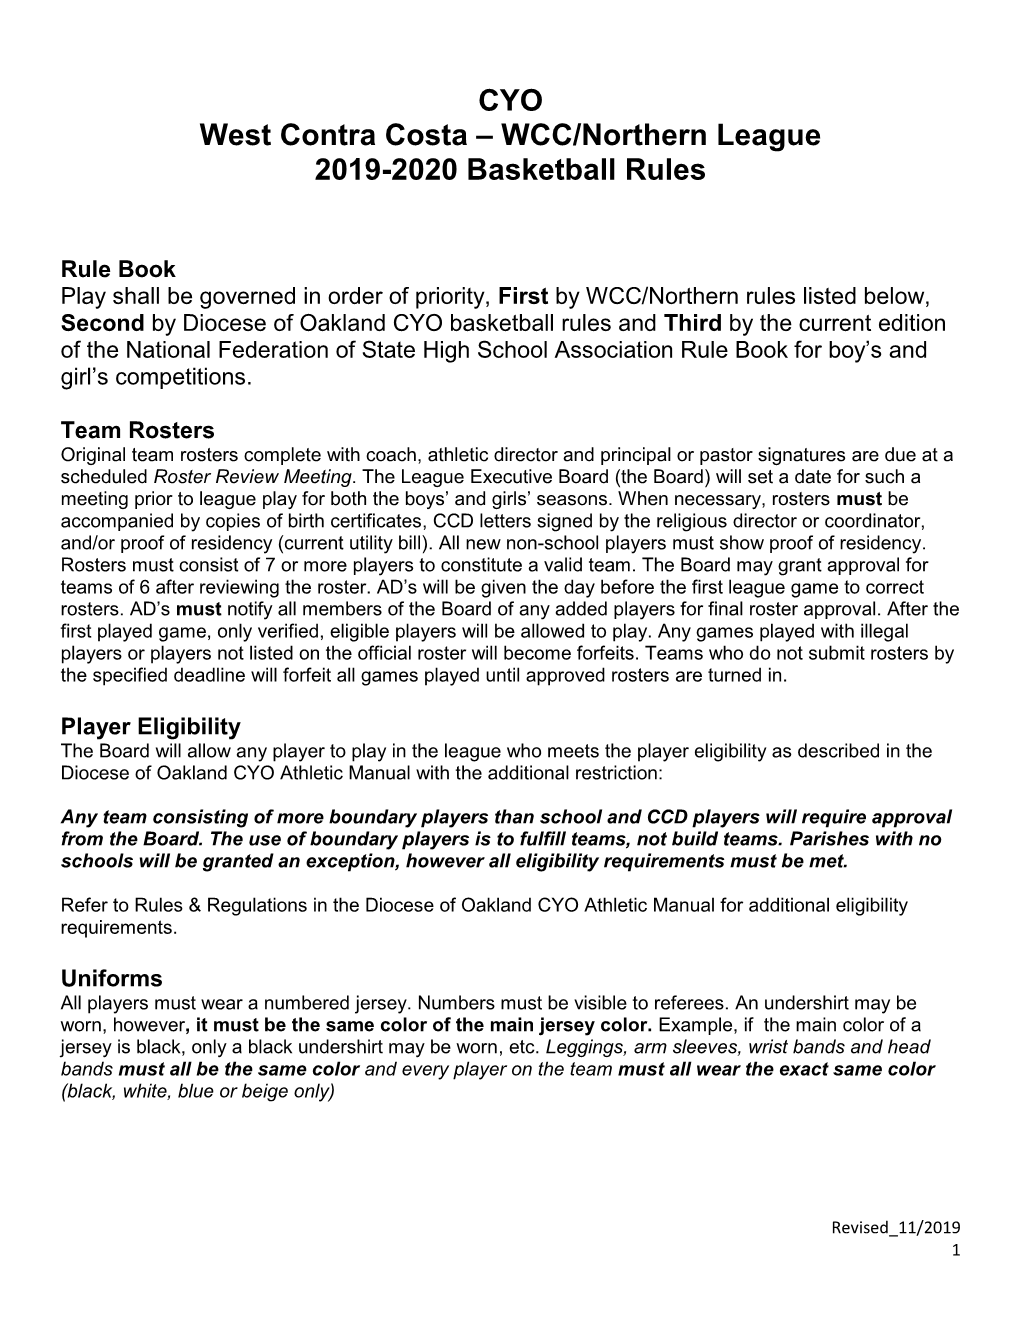 CYO West Contra Costa – WCC/Northern League 2019-2020 Basketball Rules